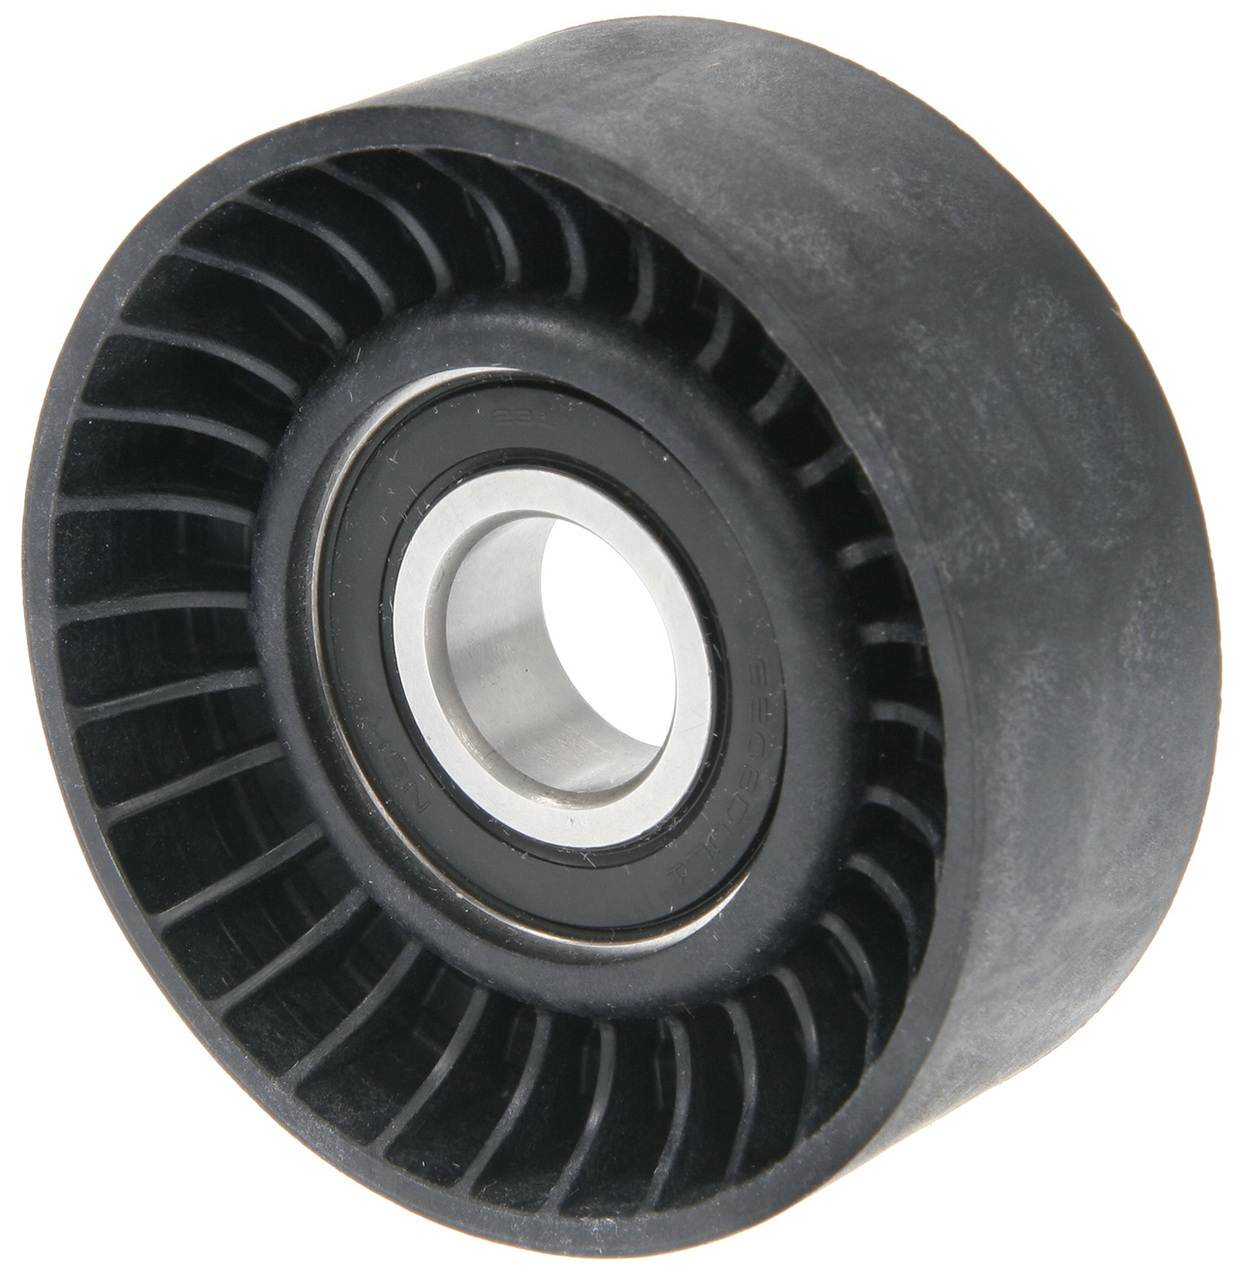 2005 Jeep Wrangler Drive Belt Tensioner Pulley - ACDelco 15-40372